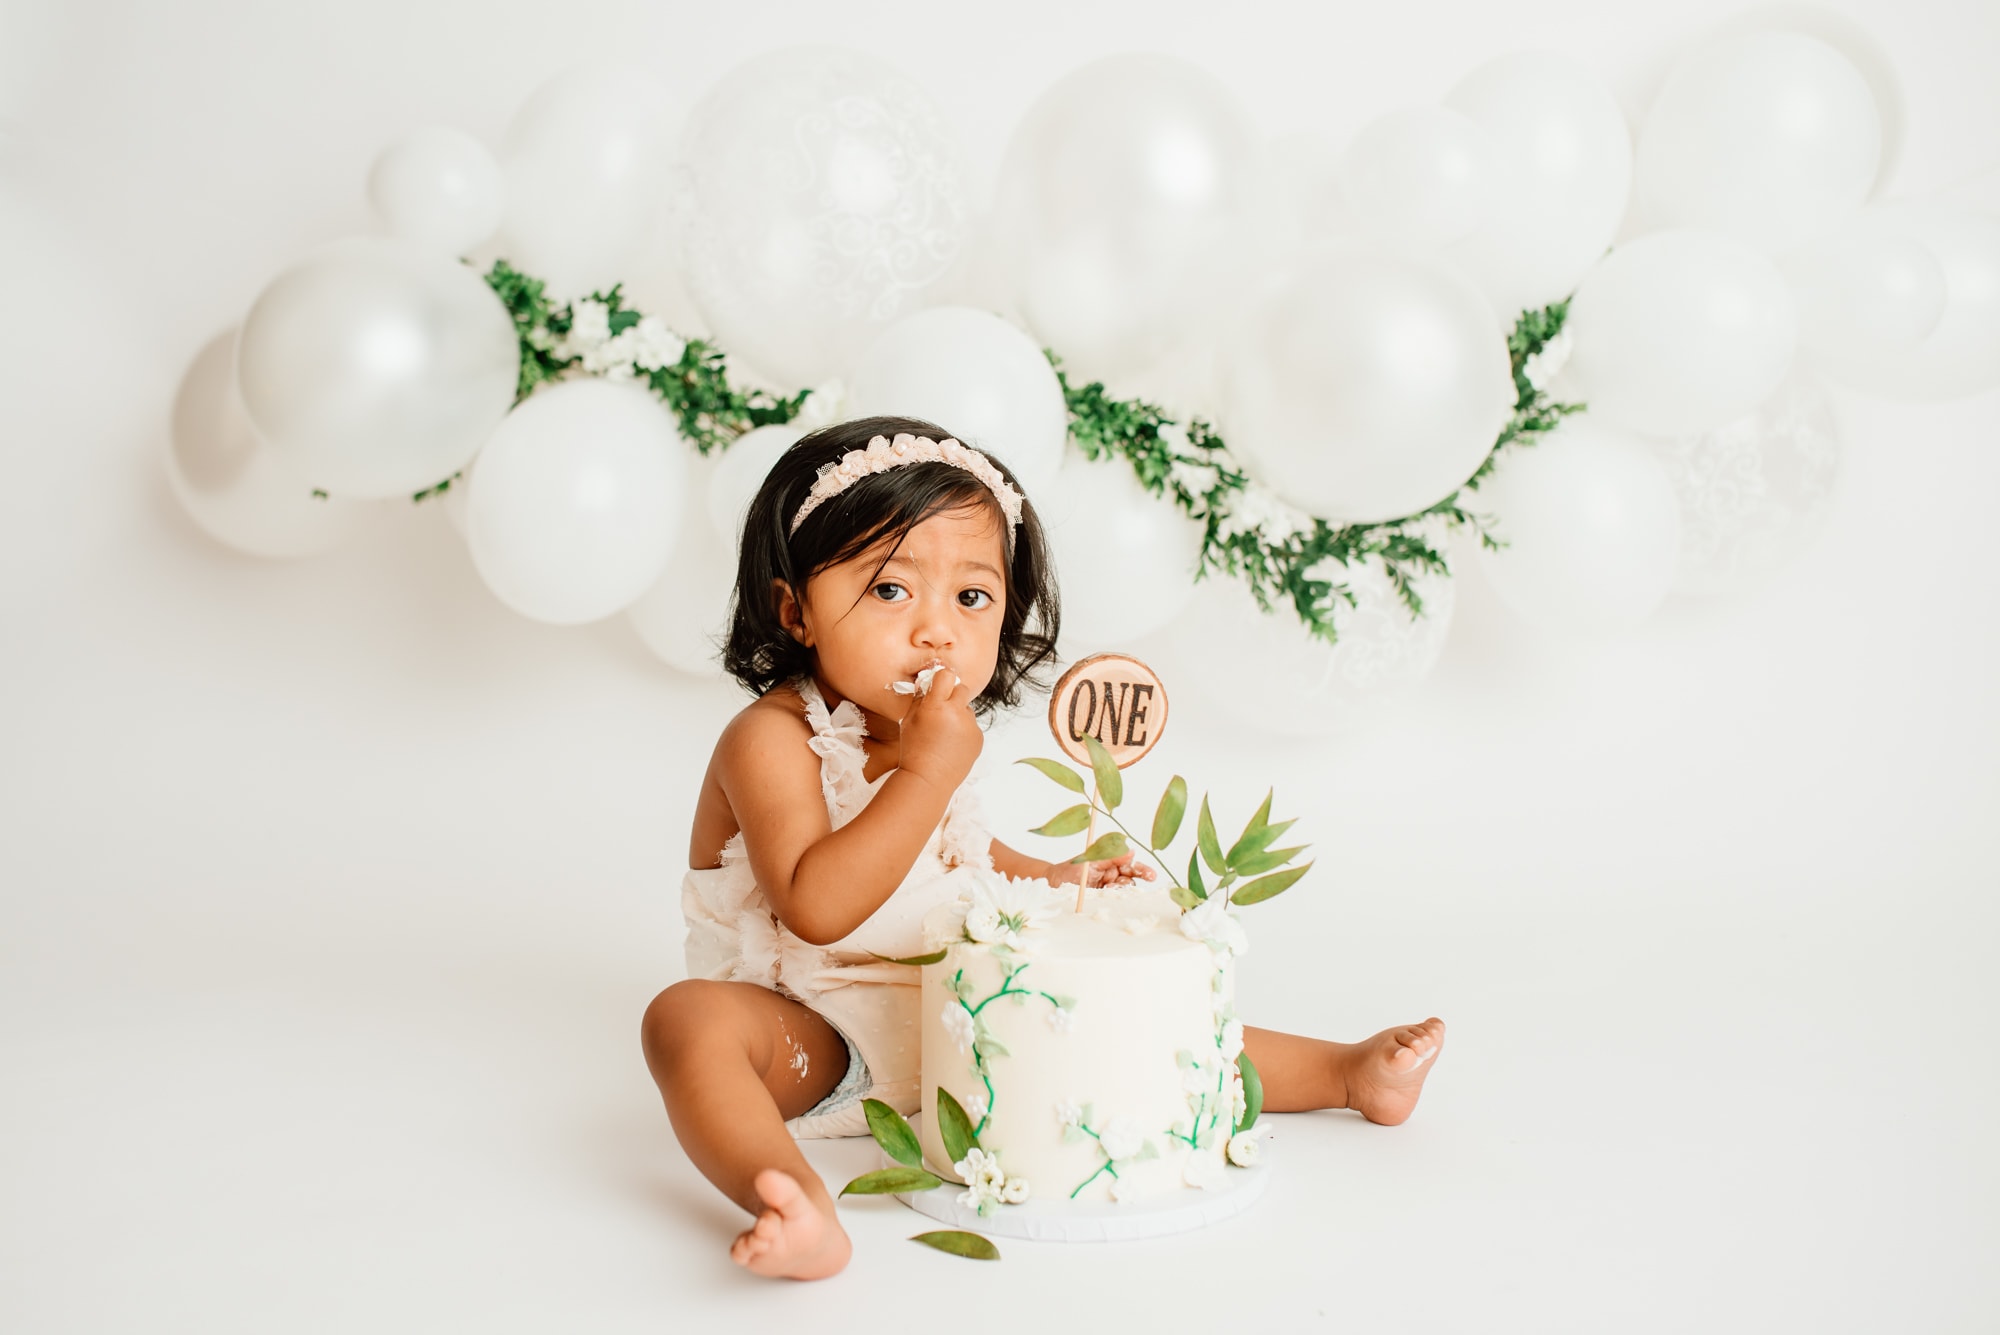 East-Indian baby girl with her fingers in her mouth, eating cake during her cake smash session.